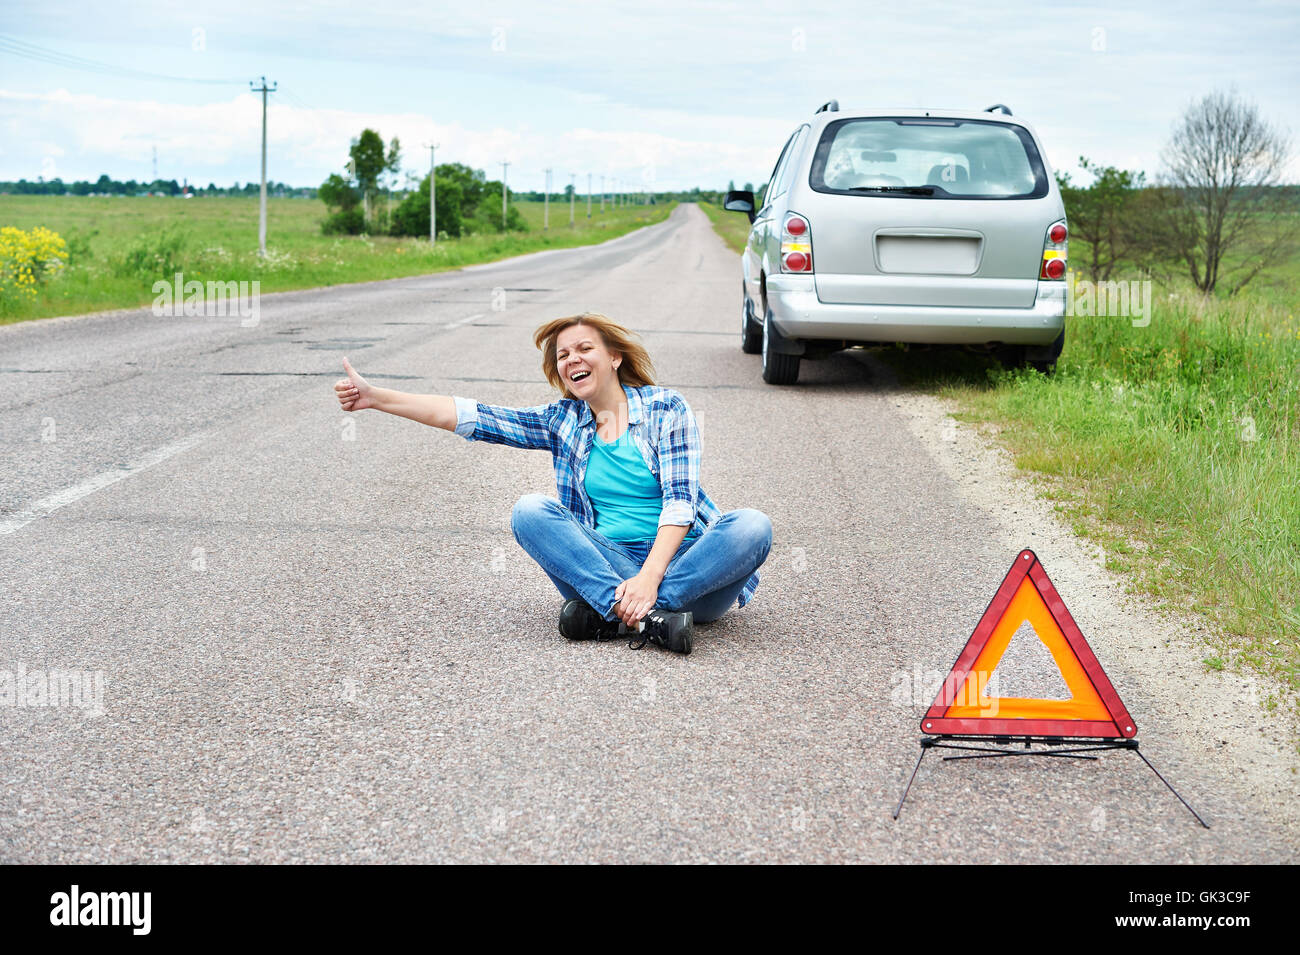 Emotional woman sitting on road near emergency sign and showing thumbs up Stock Photo